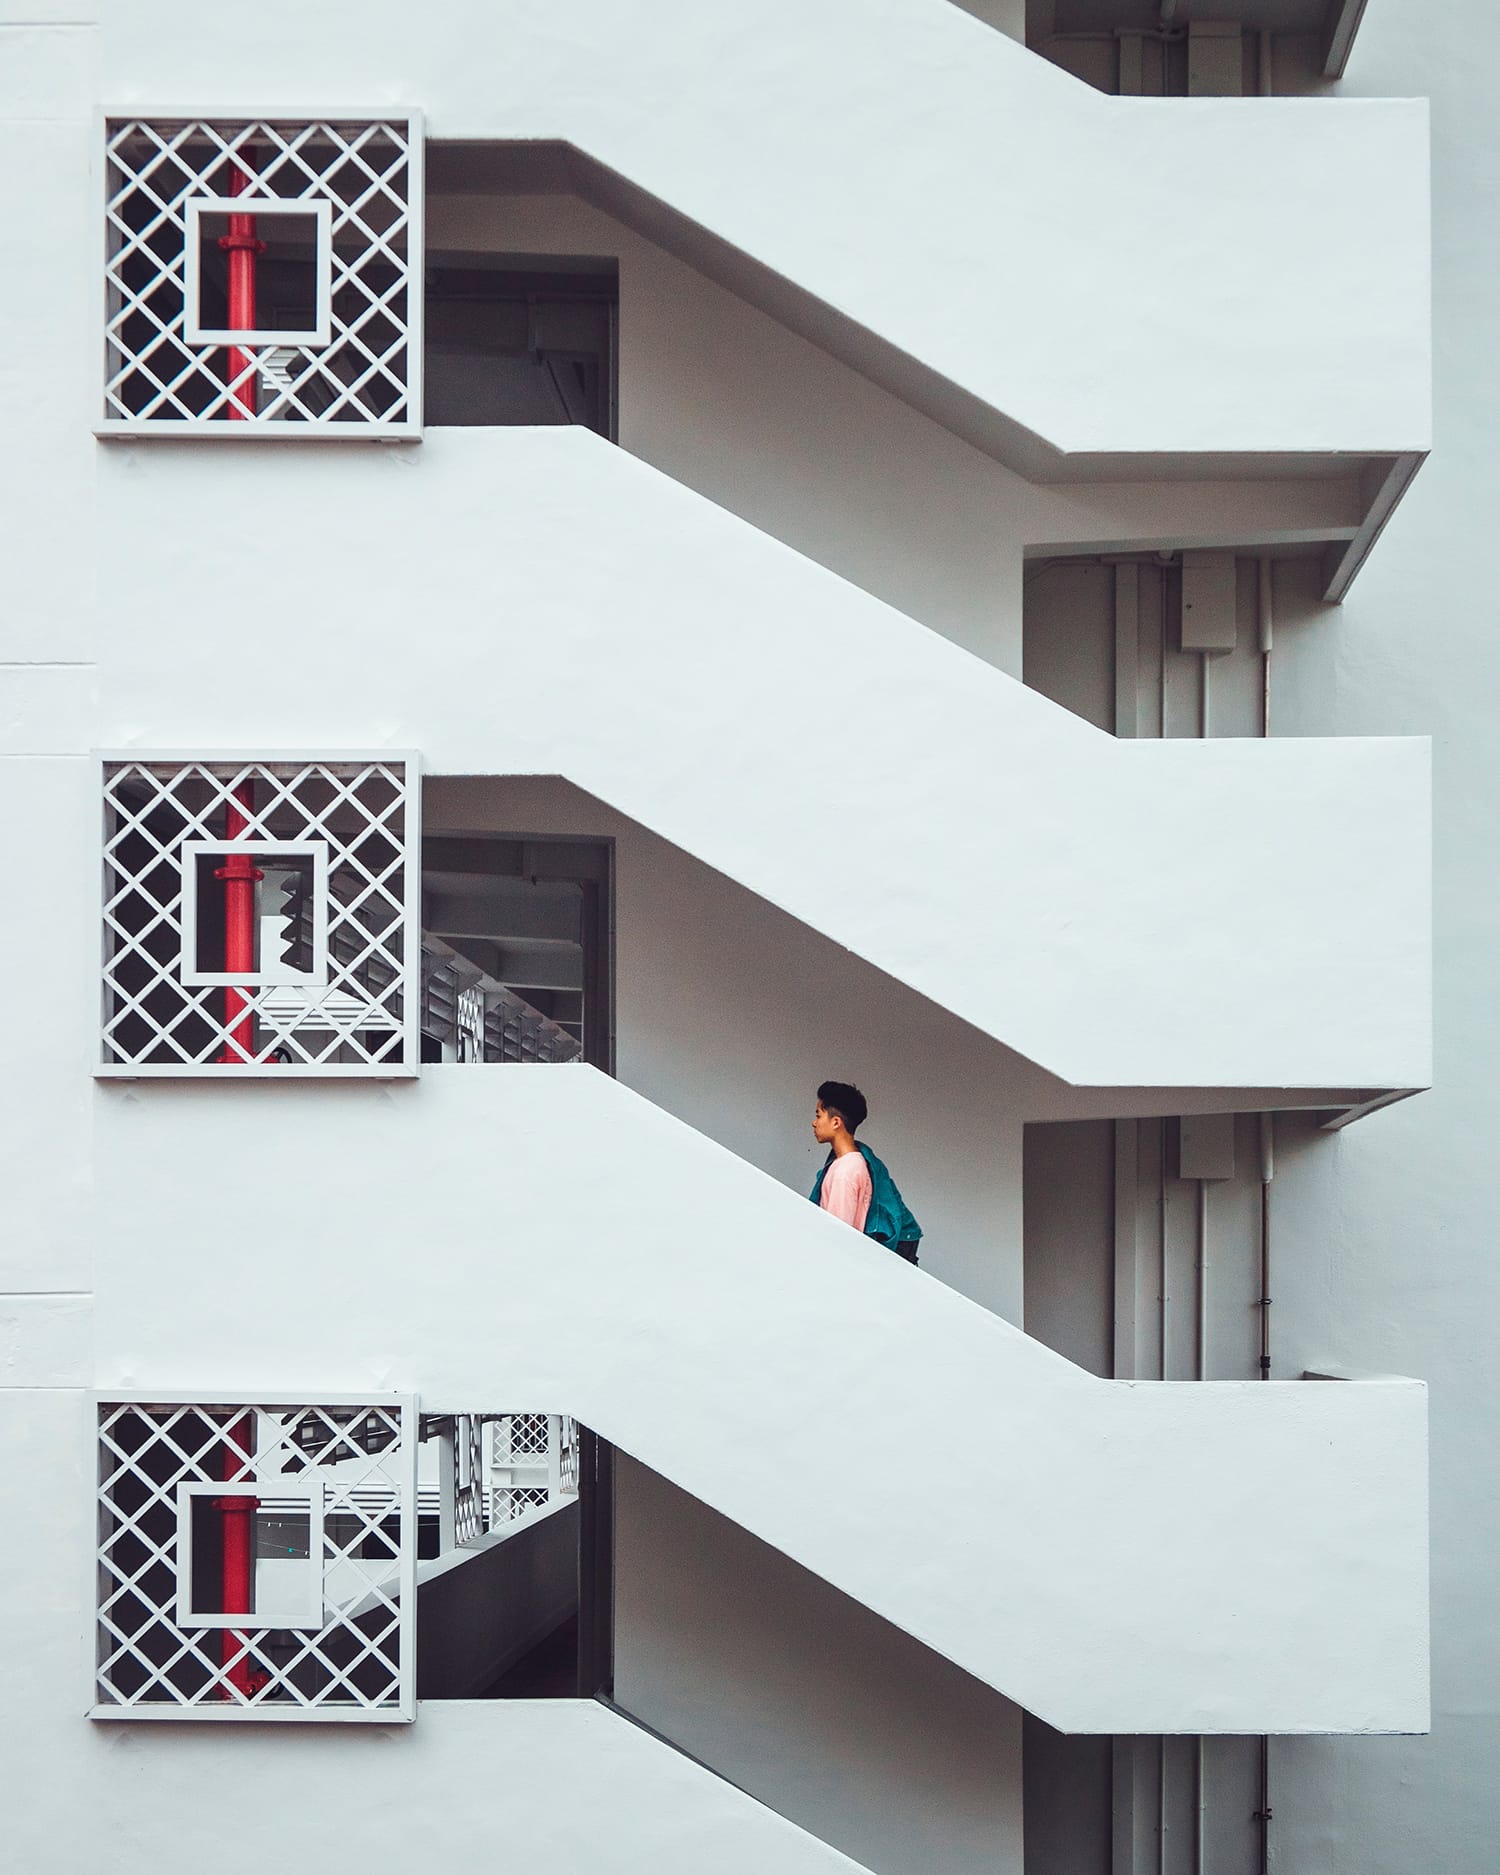 How to Use Patterns and Repetition to Create Stronger Compositions